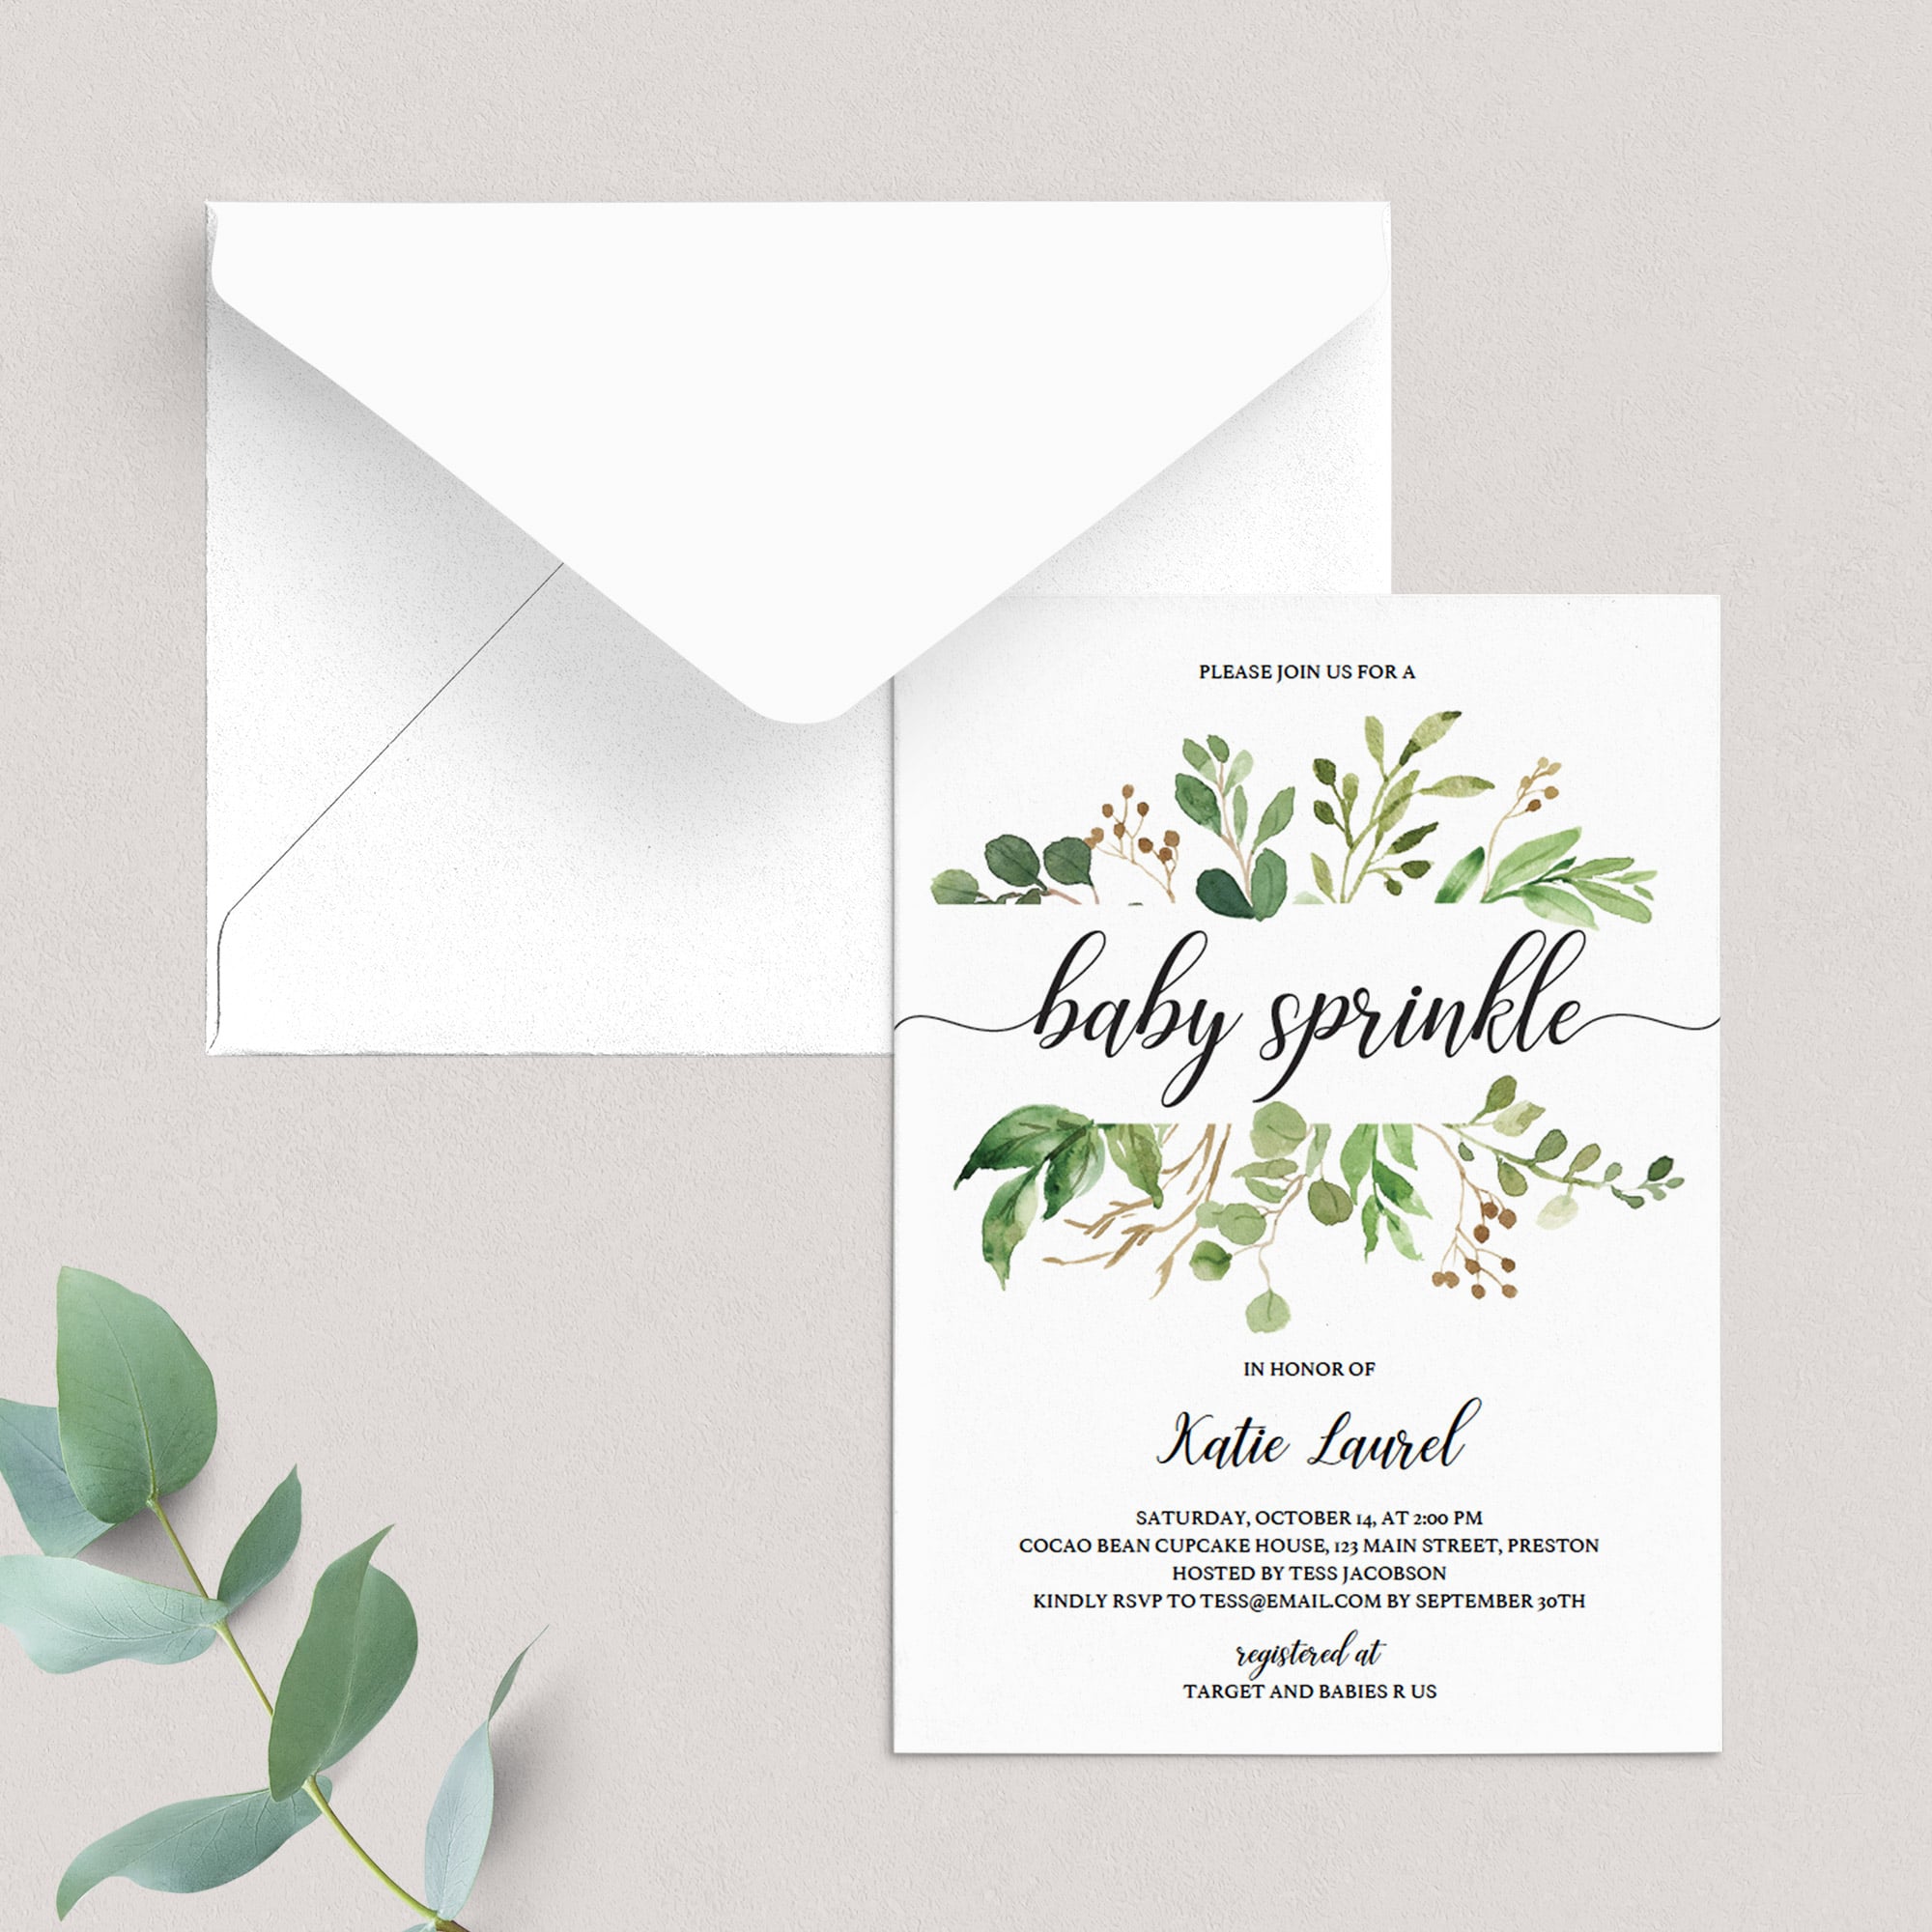 Green baby sprinkle invite template by LittleSizzle